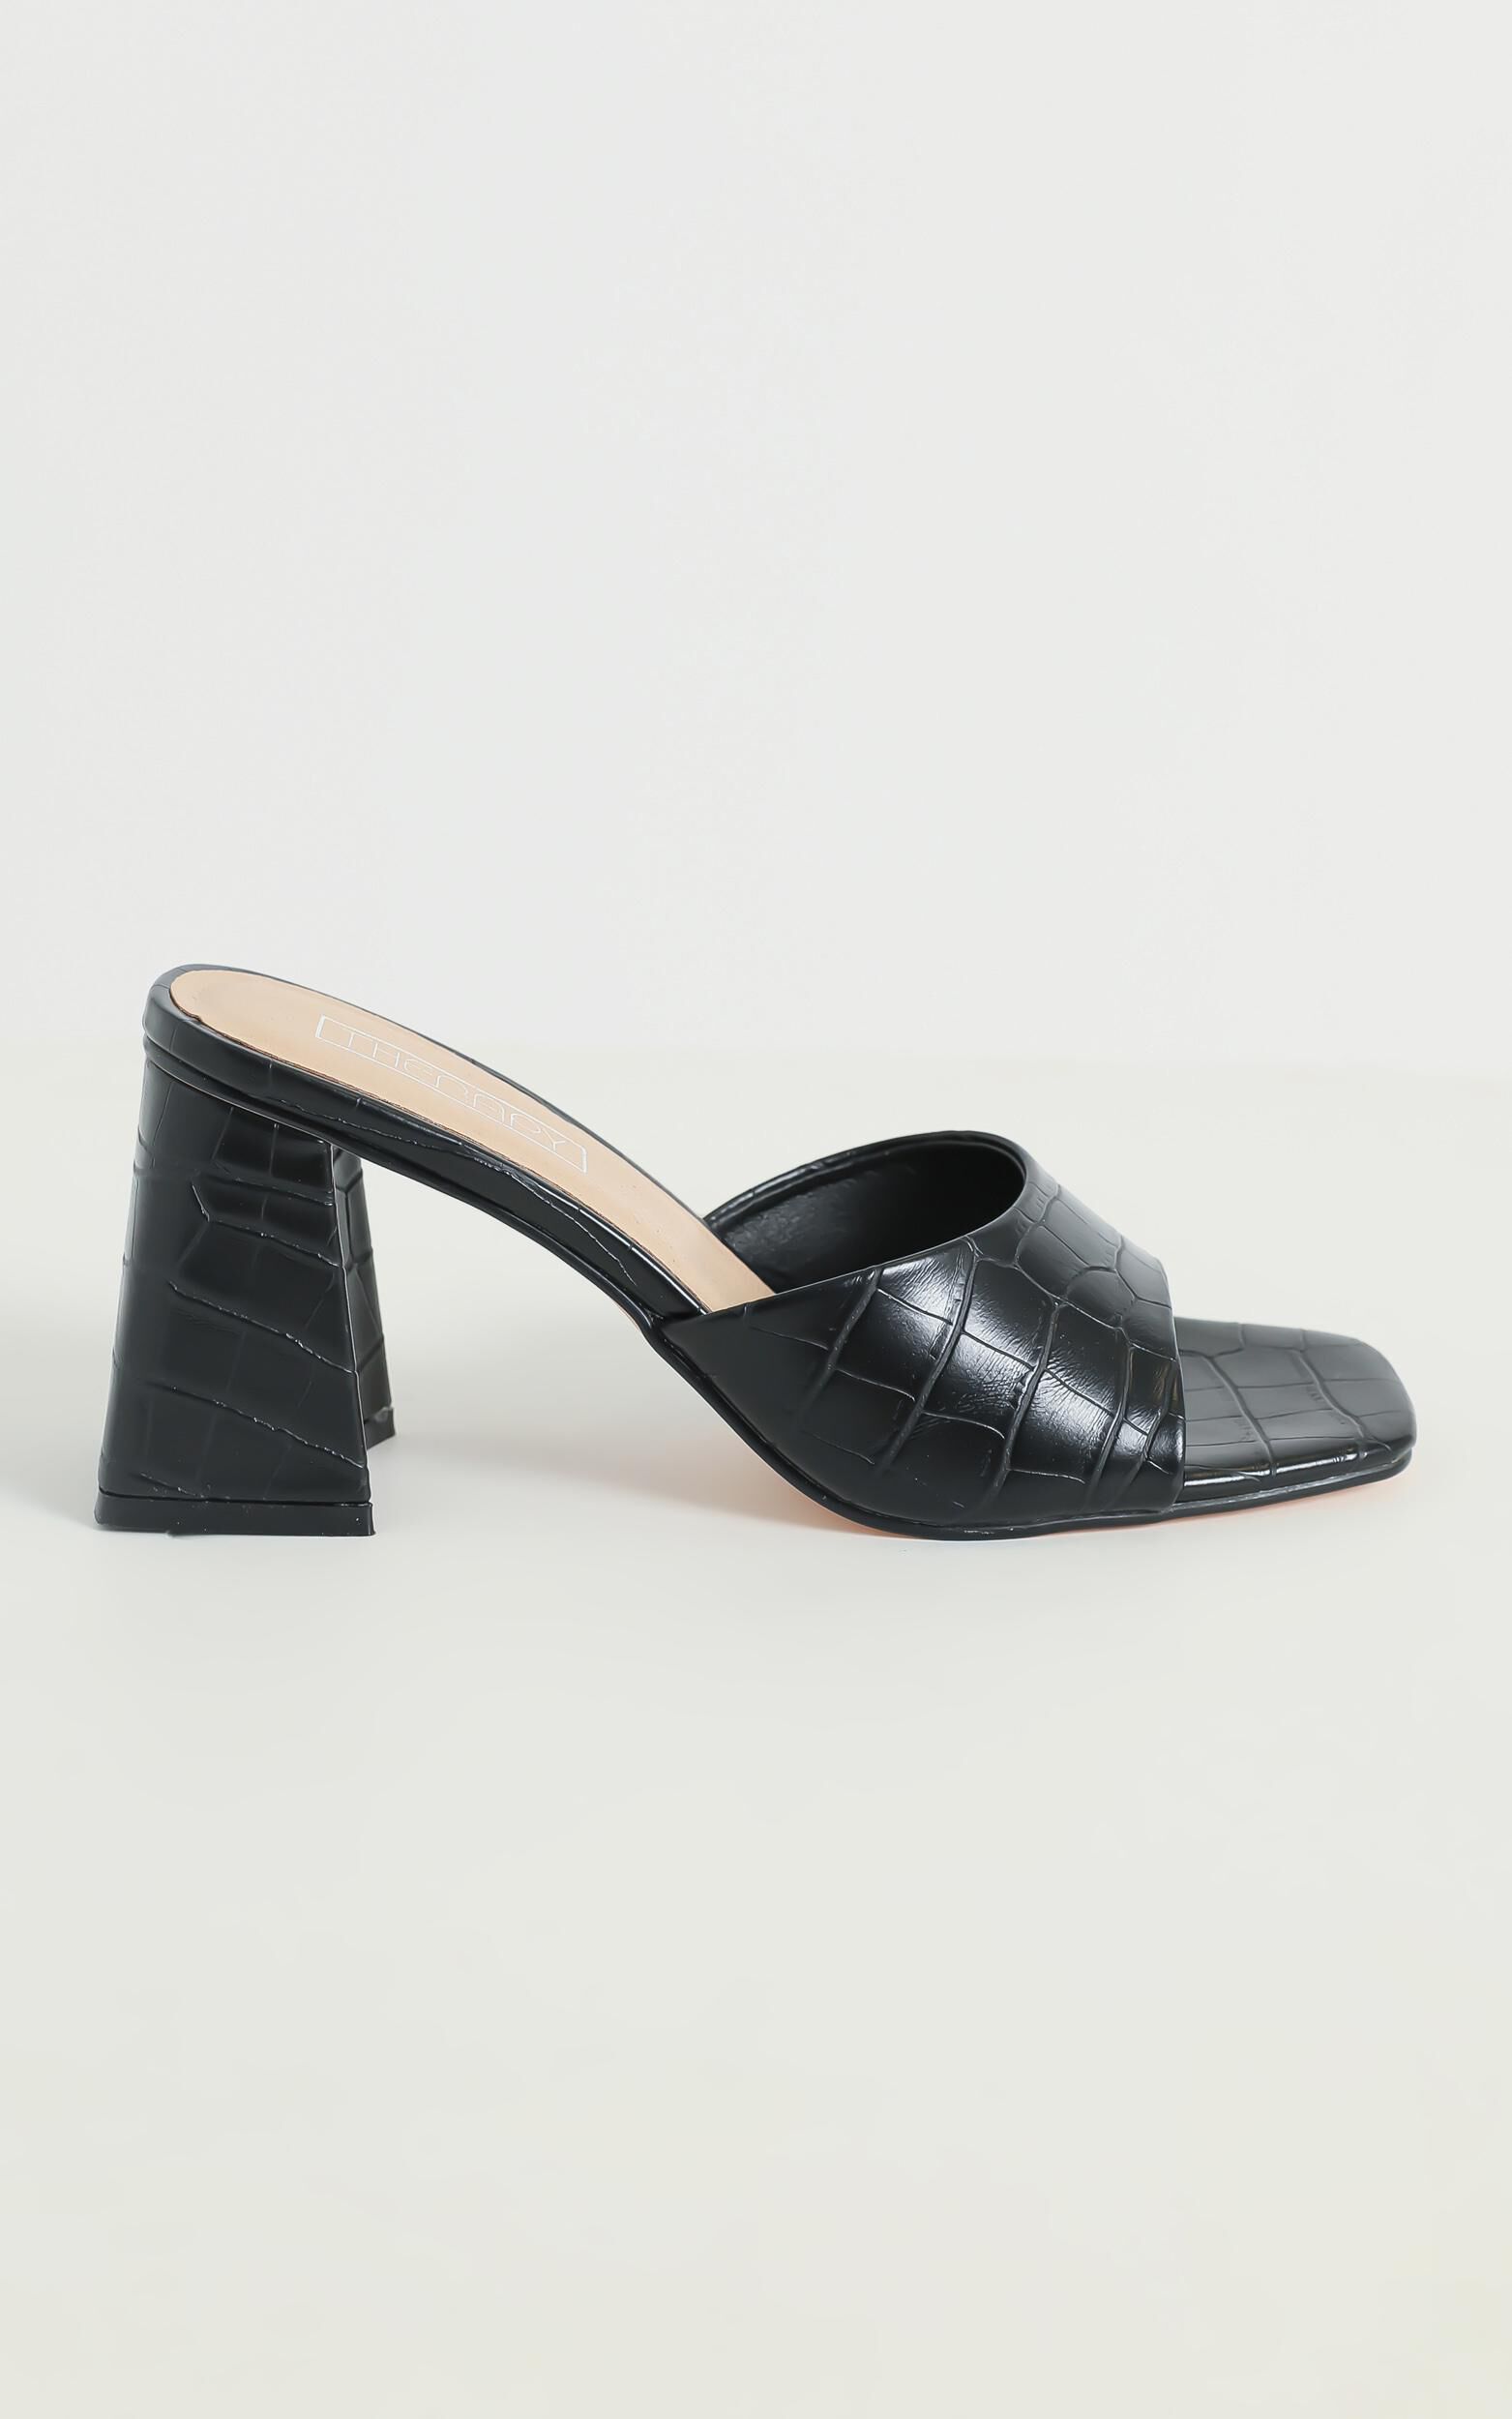 Therapy - Colina Heels in Black Croc - 05, BLK1